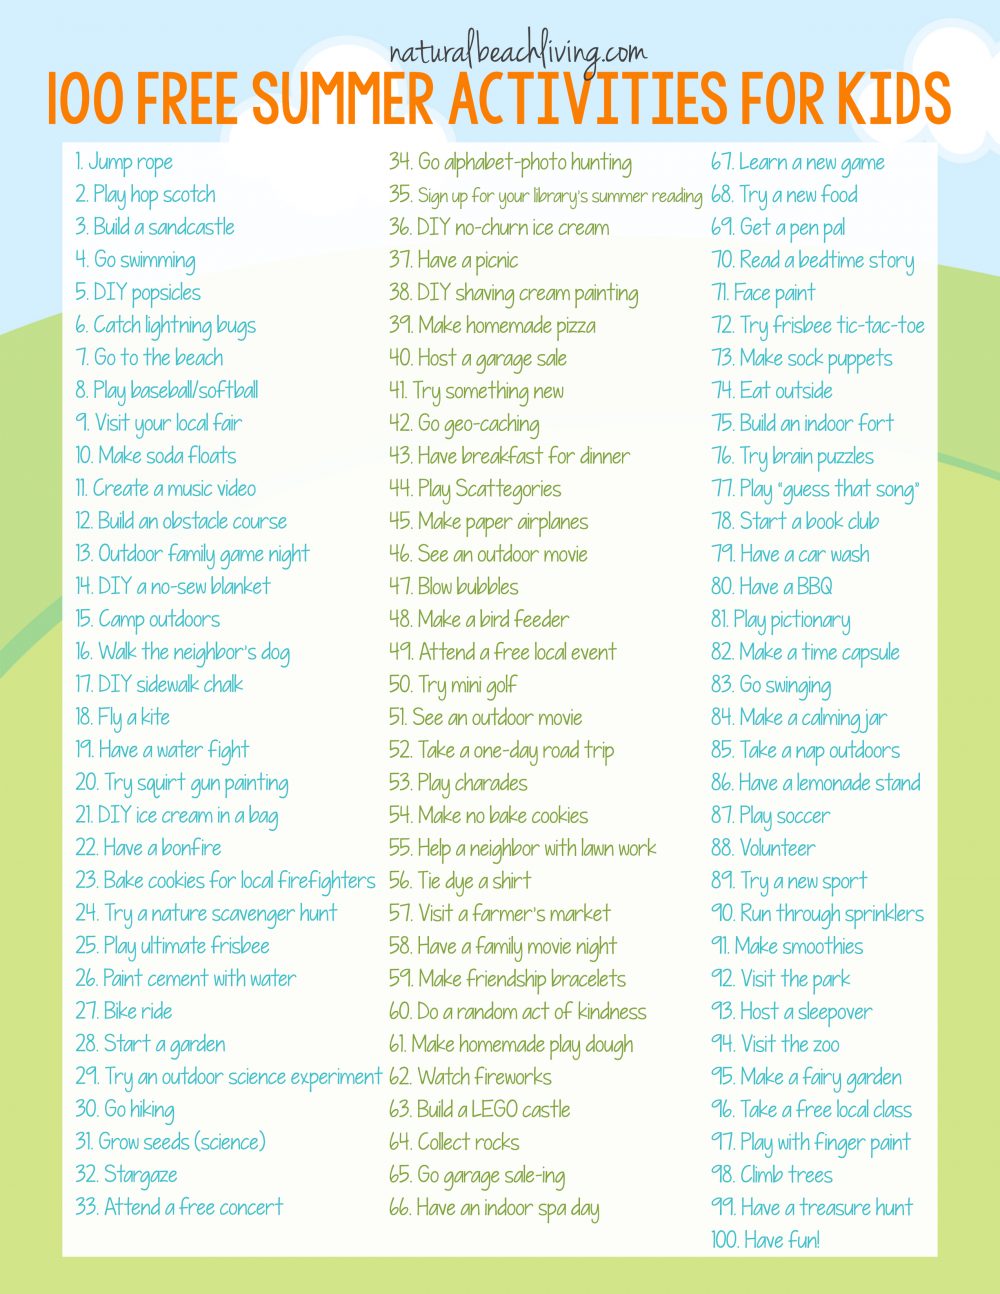 The Ultimate Guide for the Best Spring Activities, Spring Ideas for Families, The Best Spring Activities, and things to do this spring. Family Activities for Spring, fun outdoor activities, Spring Activities for kids, Spring Bucket List, Spring Family Activities, Bucket List Printable for Spring, Spring Nature activities, Free Printable